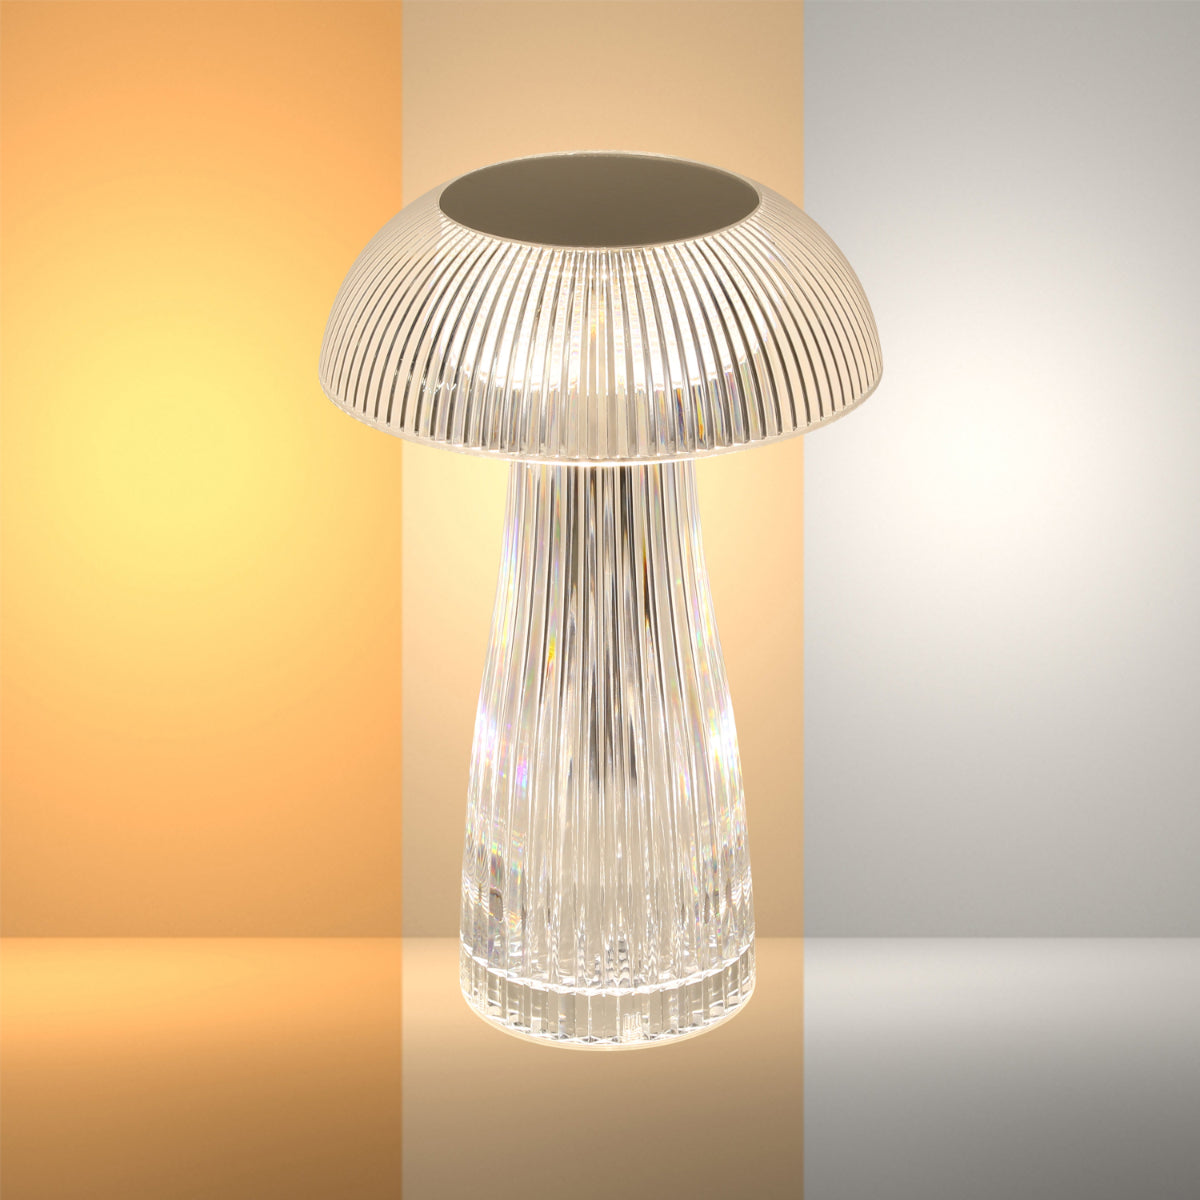 Main image of Lumi Crystal Touch: Rechargeable Mushroom-Shaped LED Lamp 130-03716